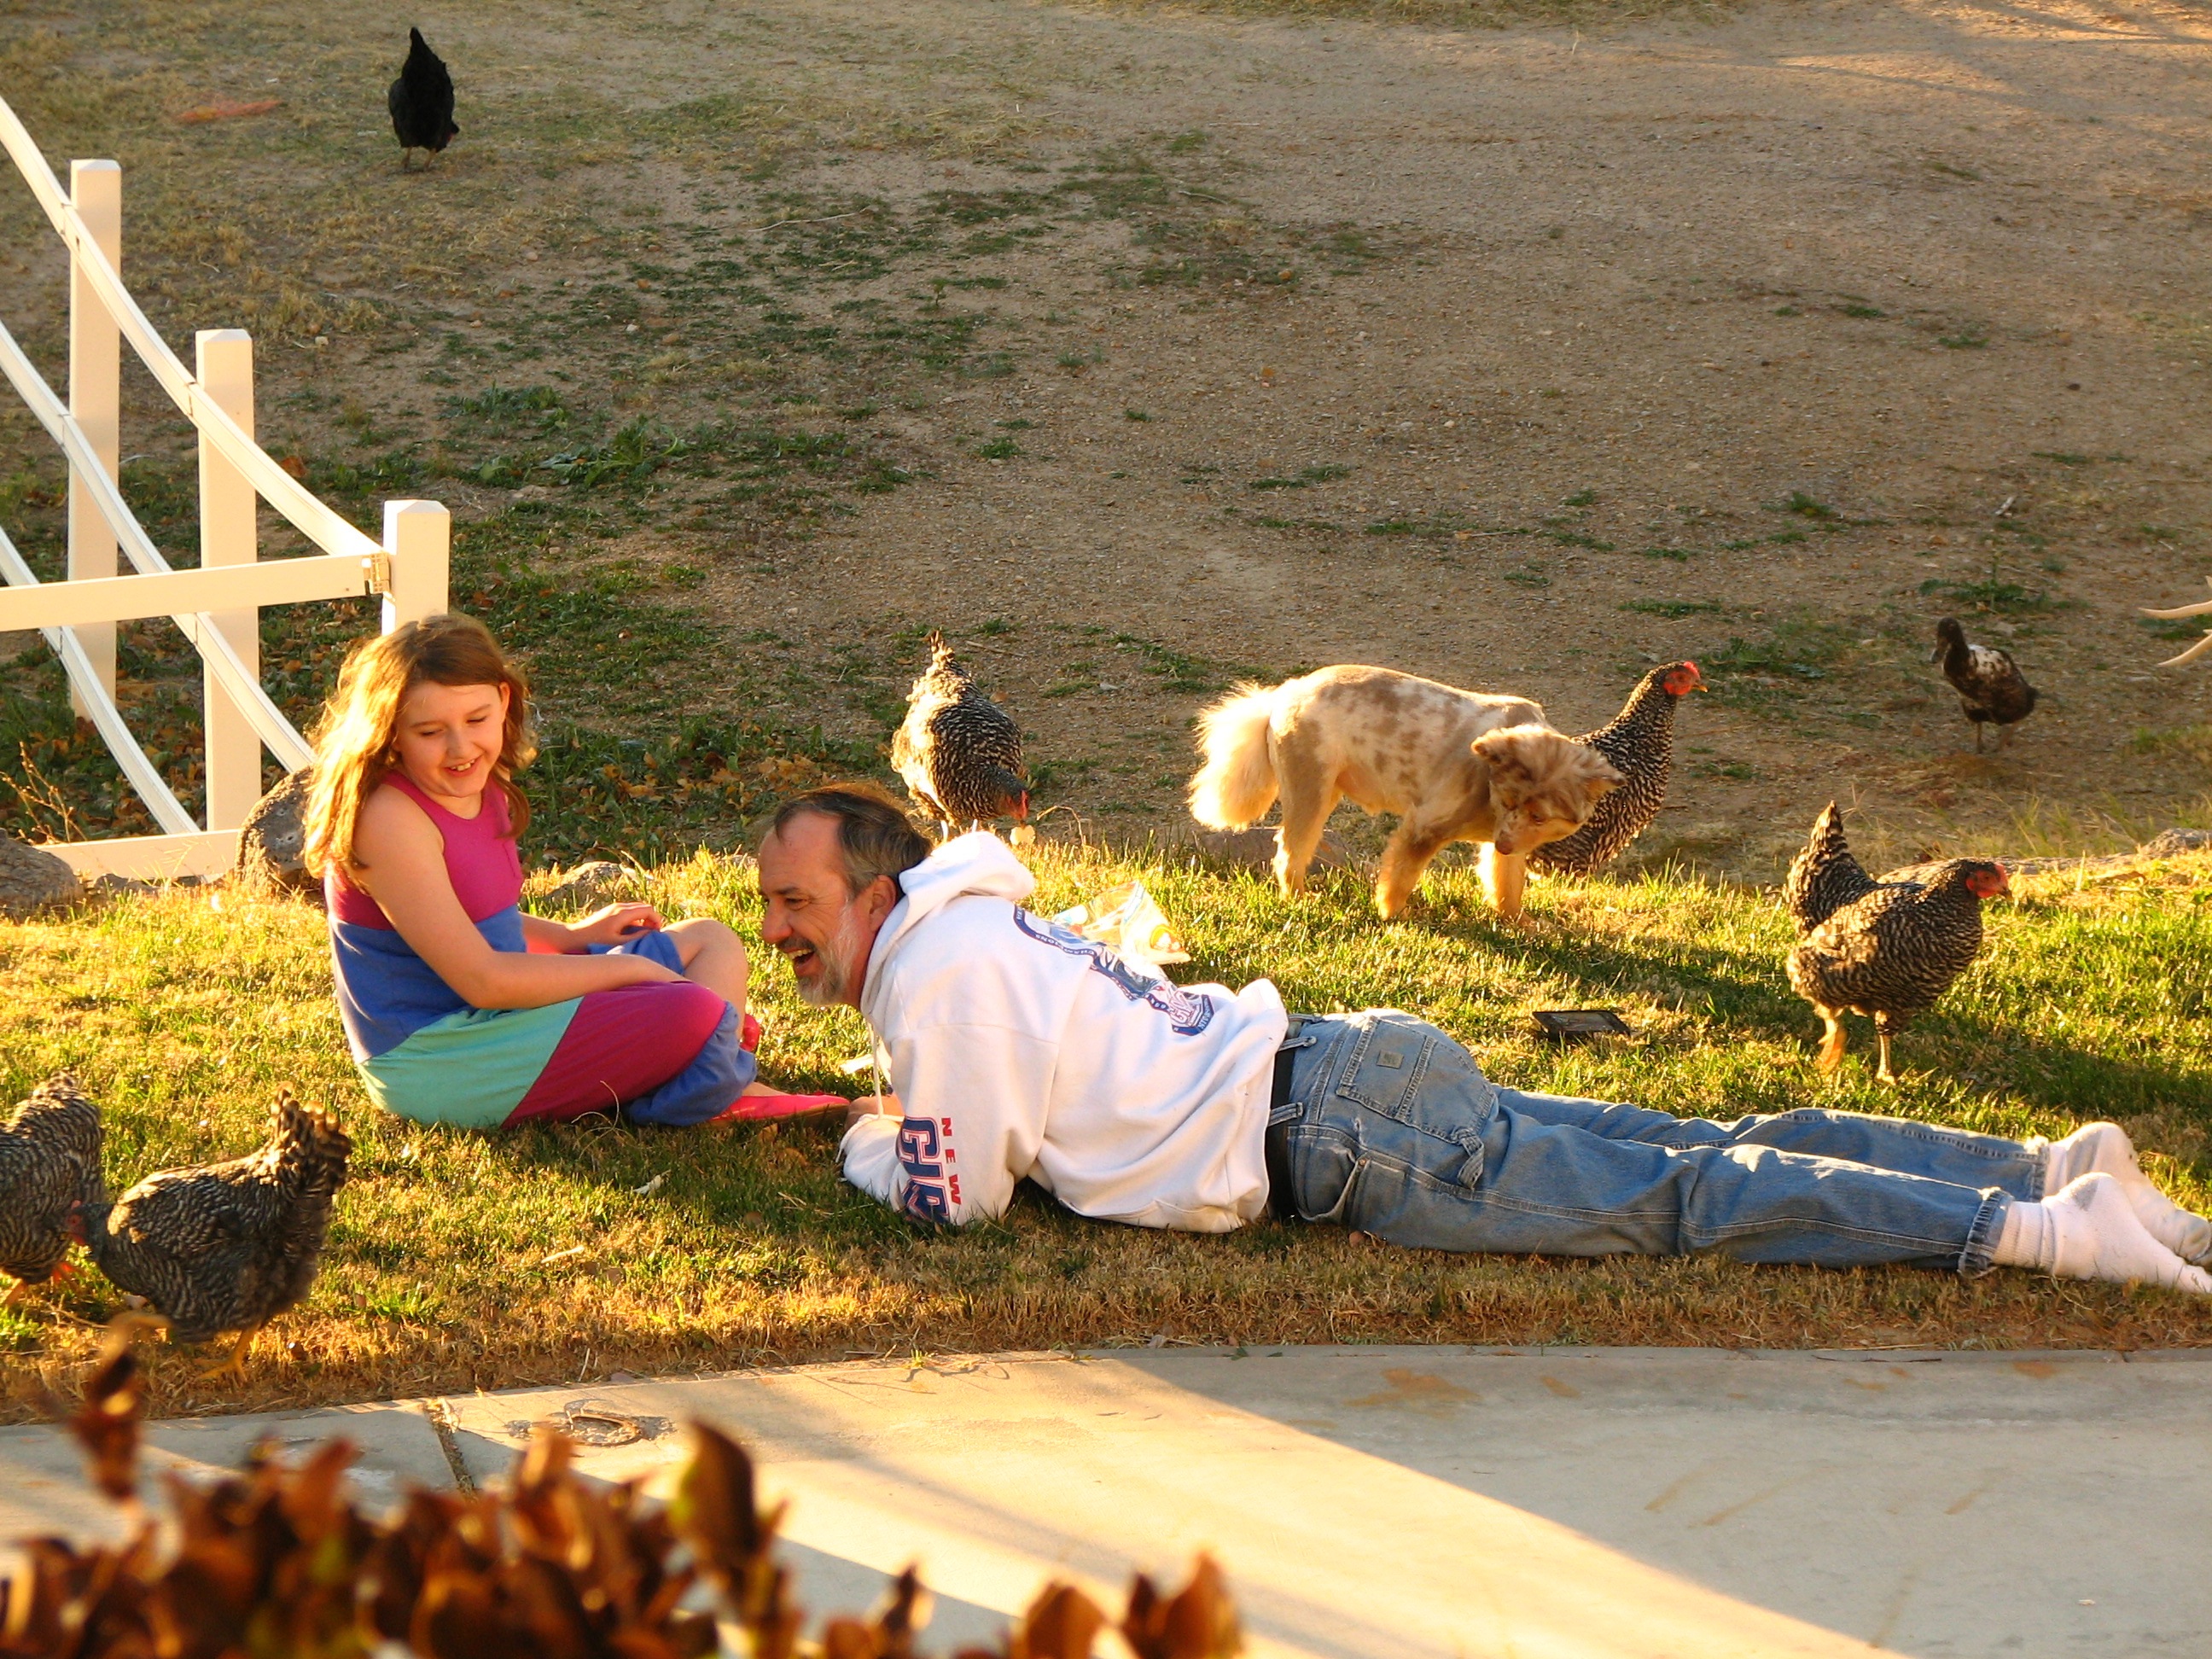 My husband and one of our daughters enjoying our chickens.